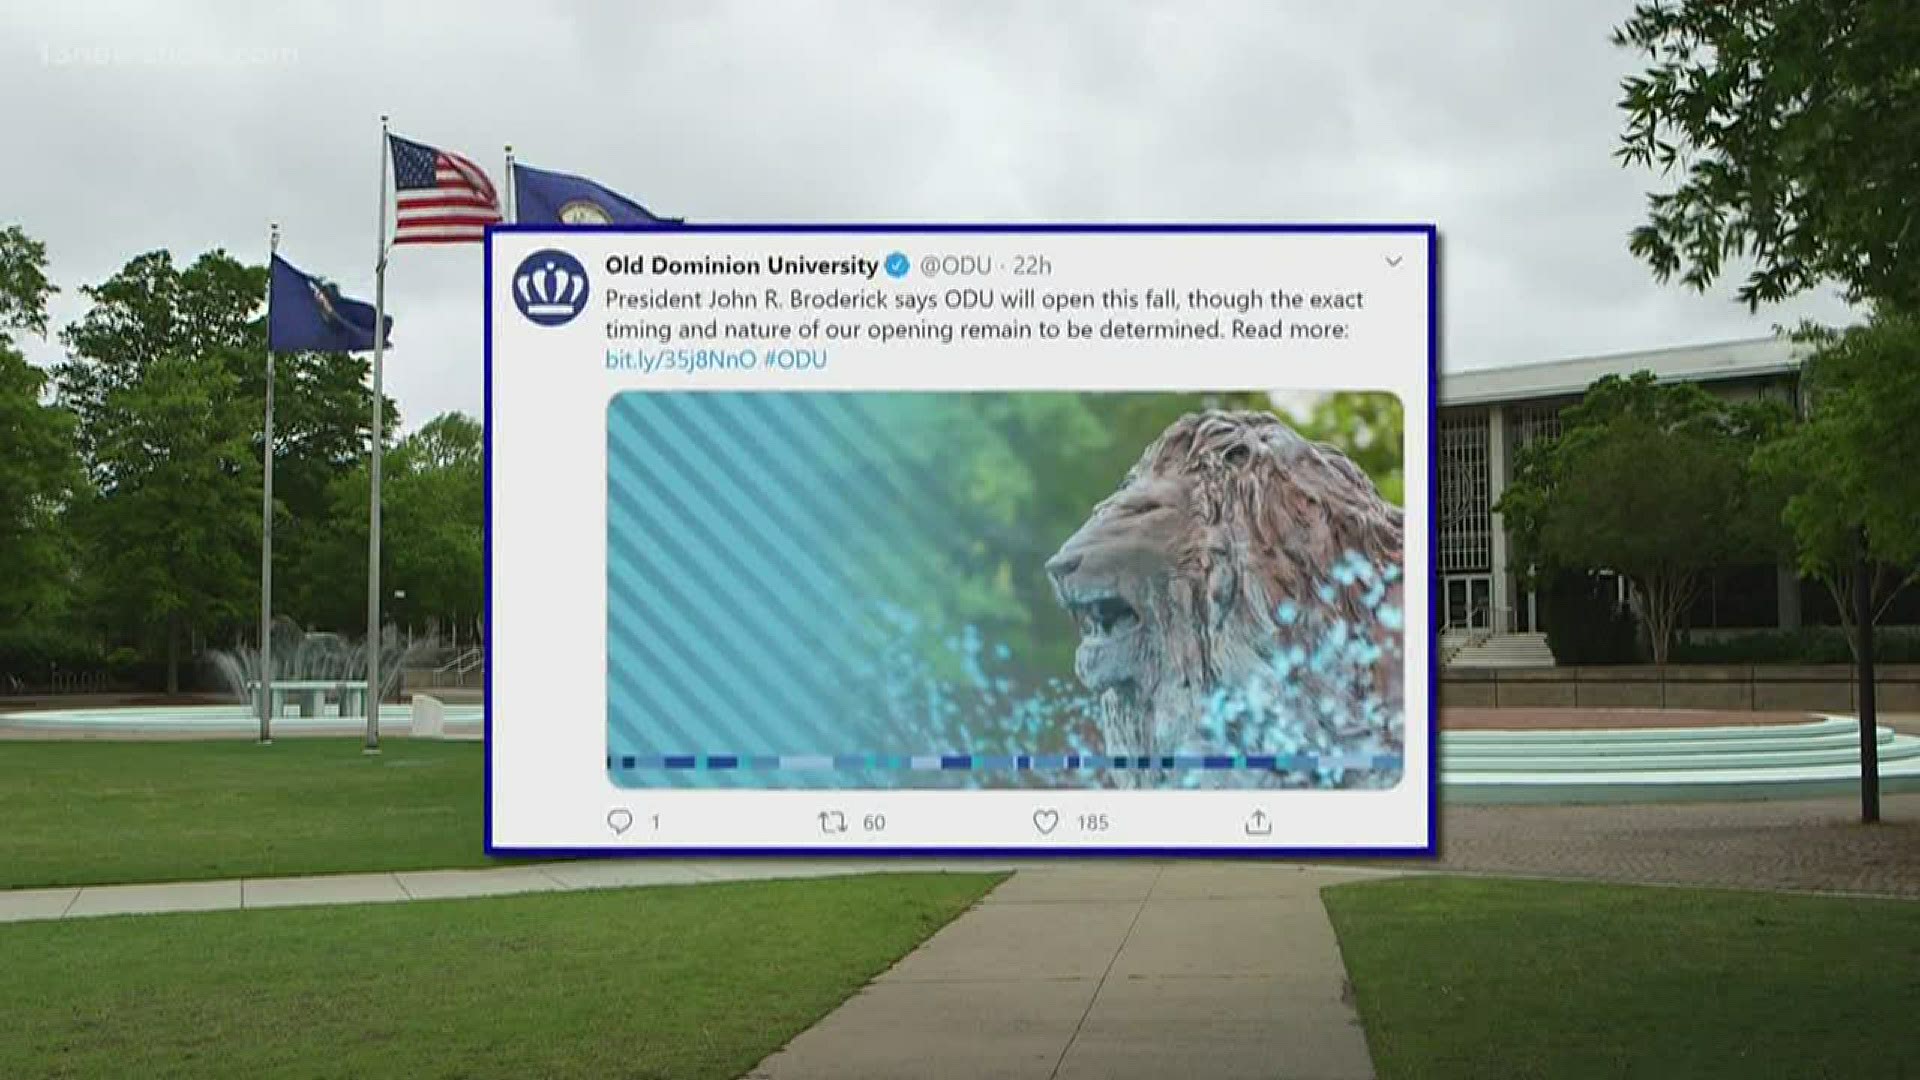 As signs of the pandemic start to wane, ODU and several other universities announced their intention to reopen for face-to-face classes in the fall.